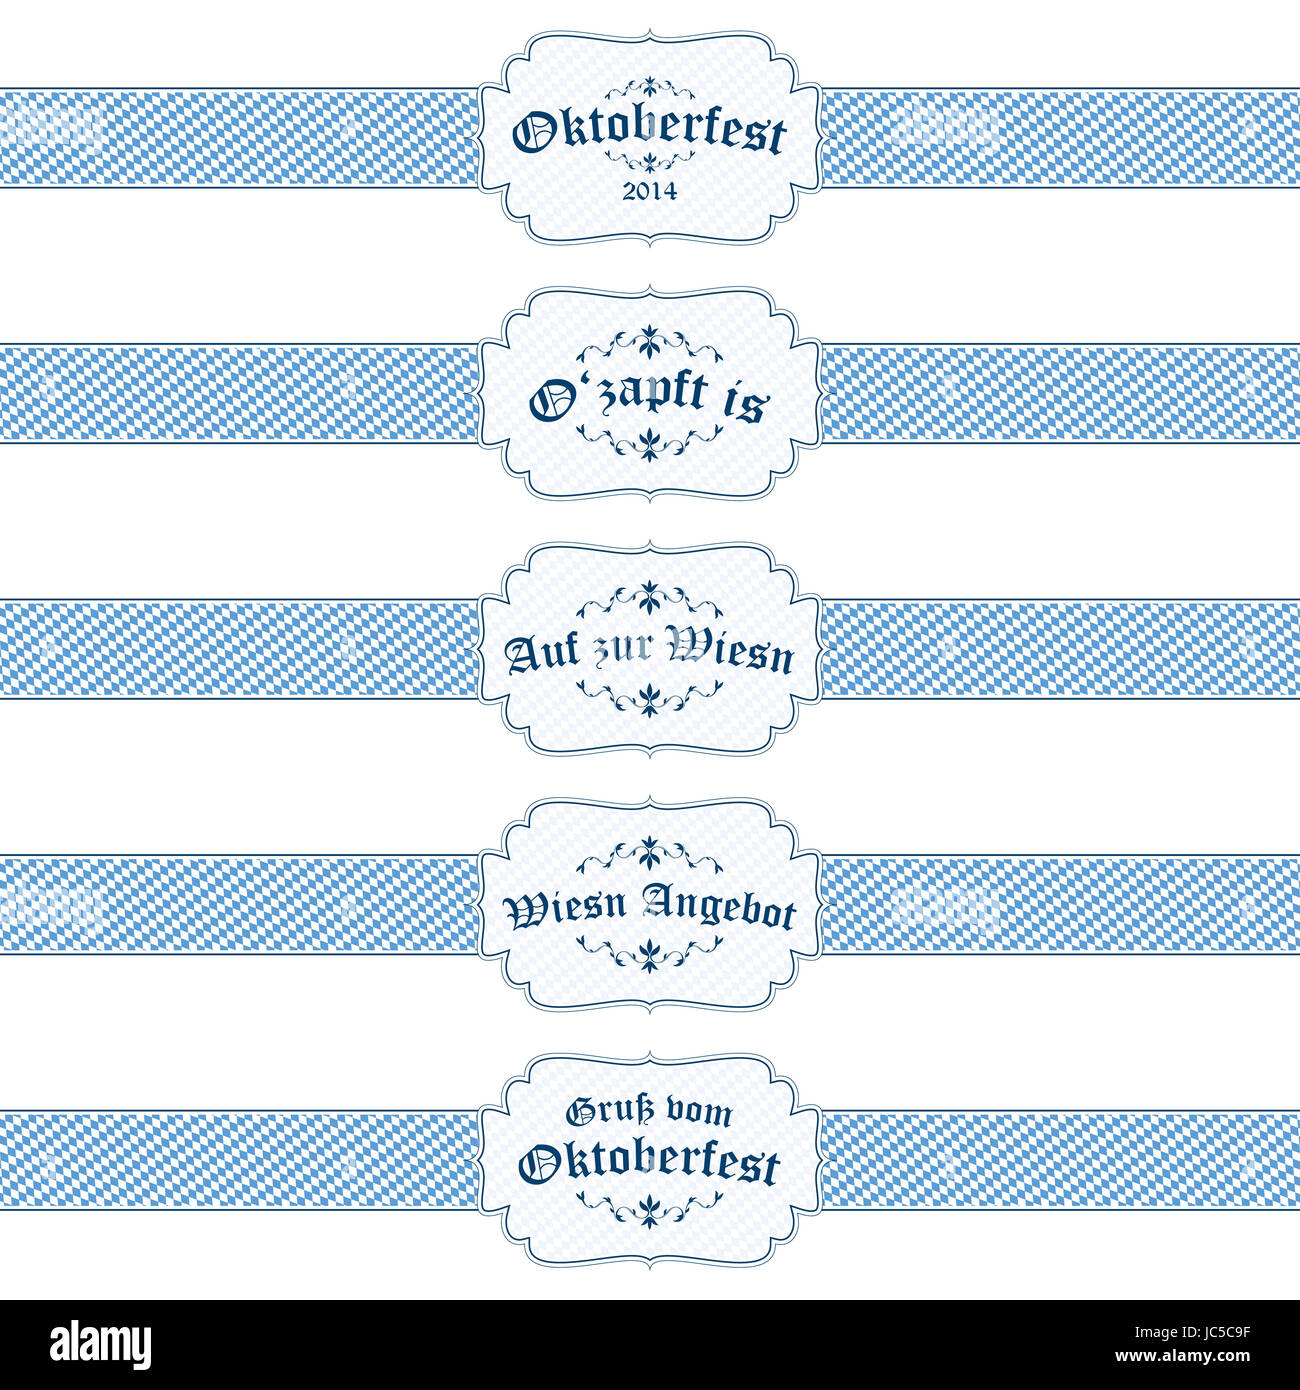 vector of five different Oktoberfest 2014 banners Stock Photo